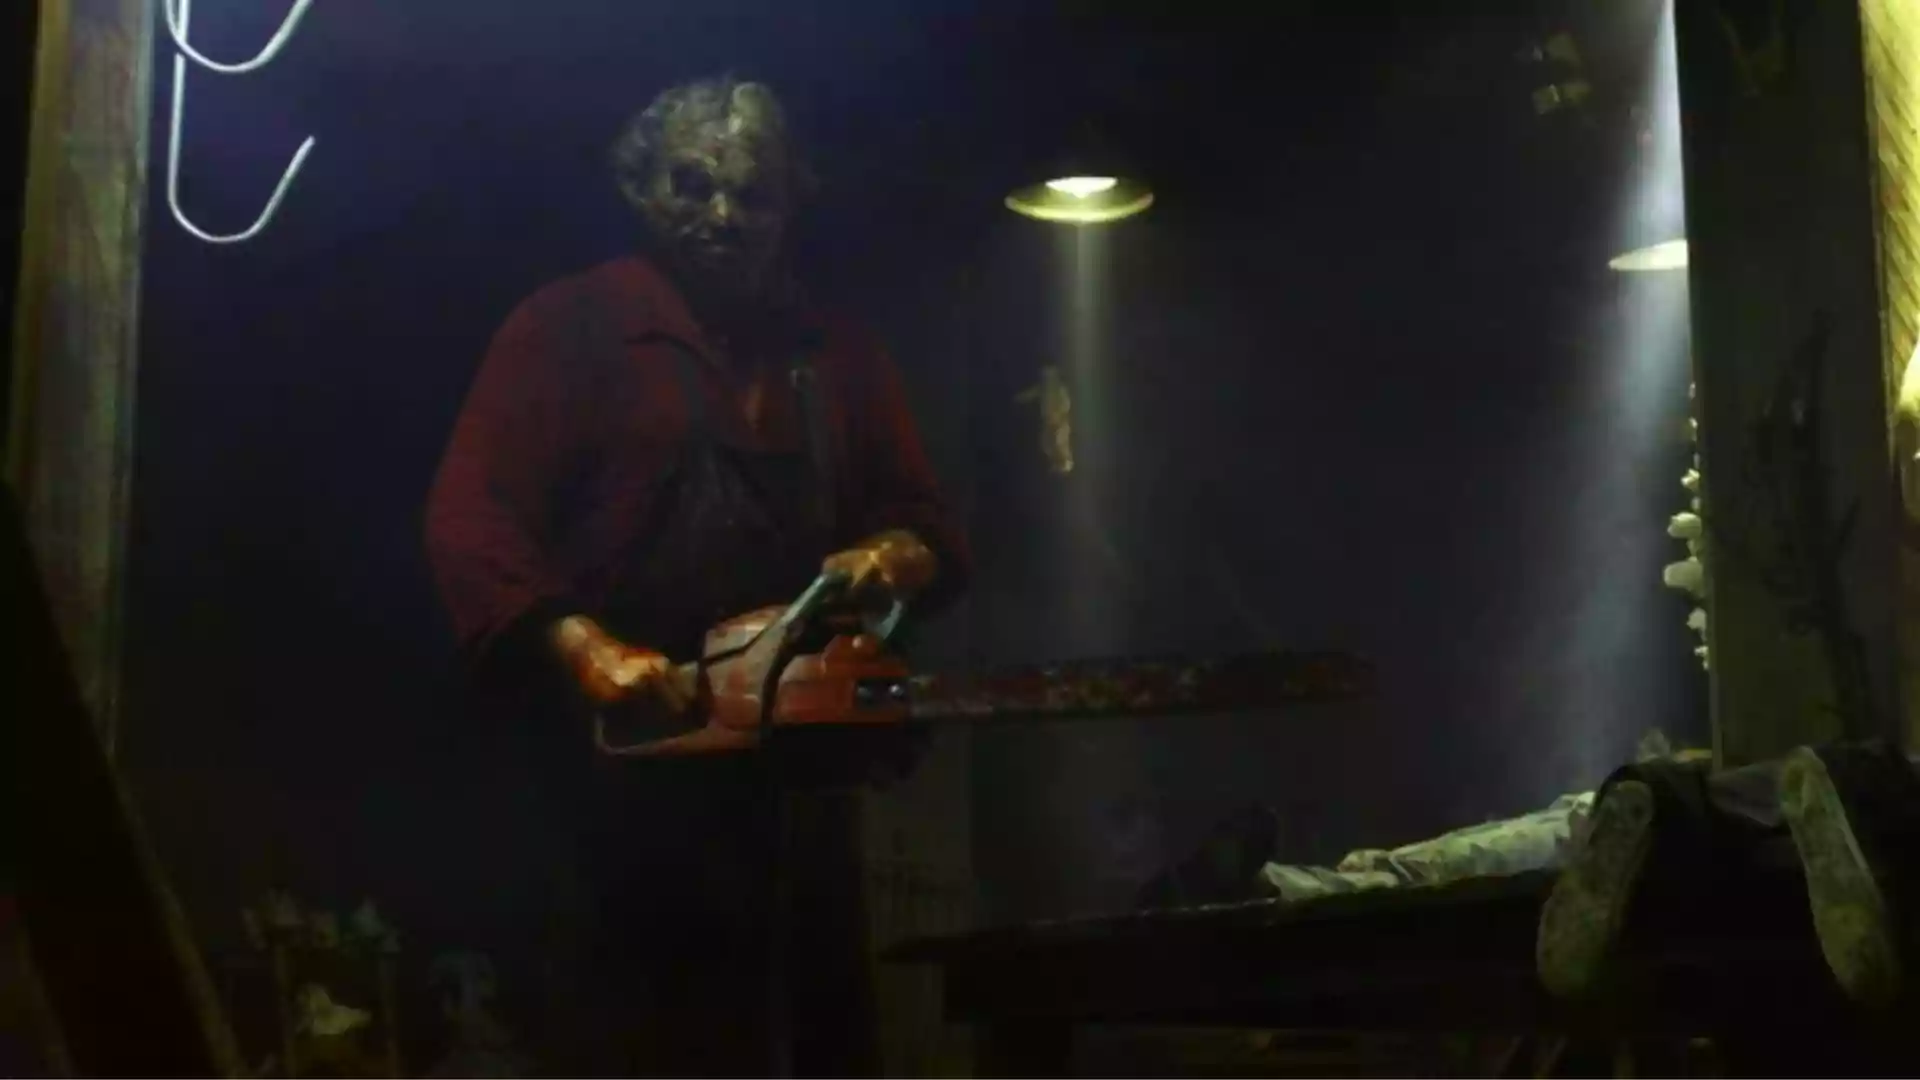 Texas Chainsaw 3D Parents Guide | Texas Chainsaw 3D Age Rating